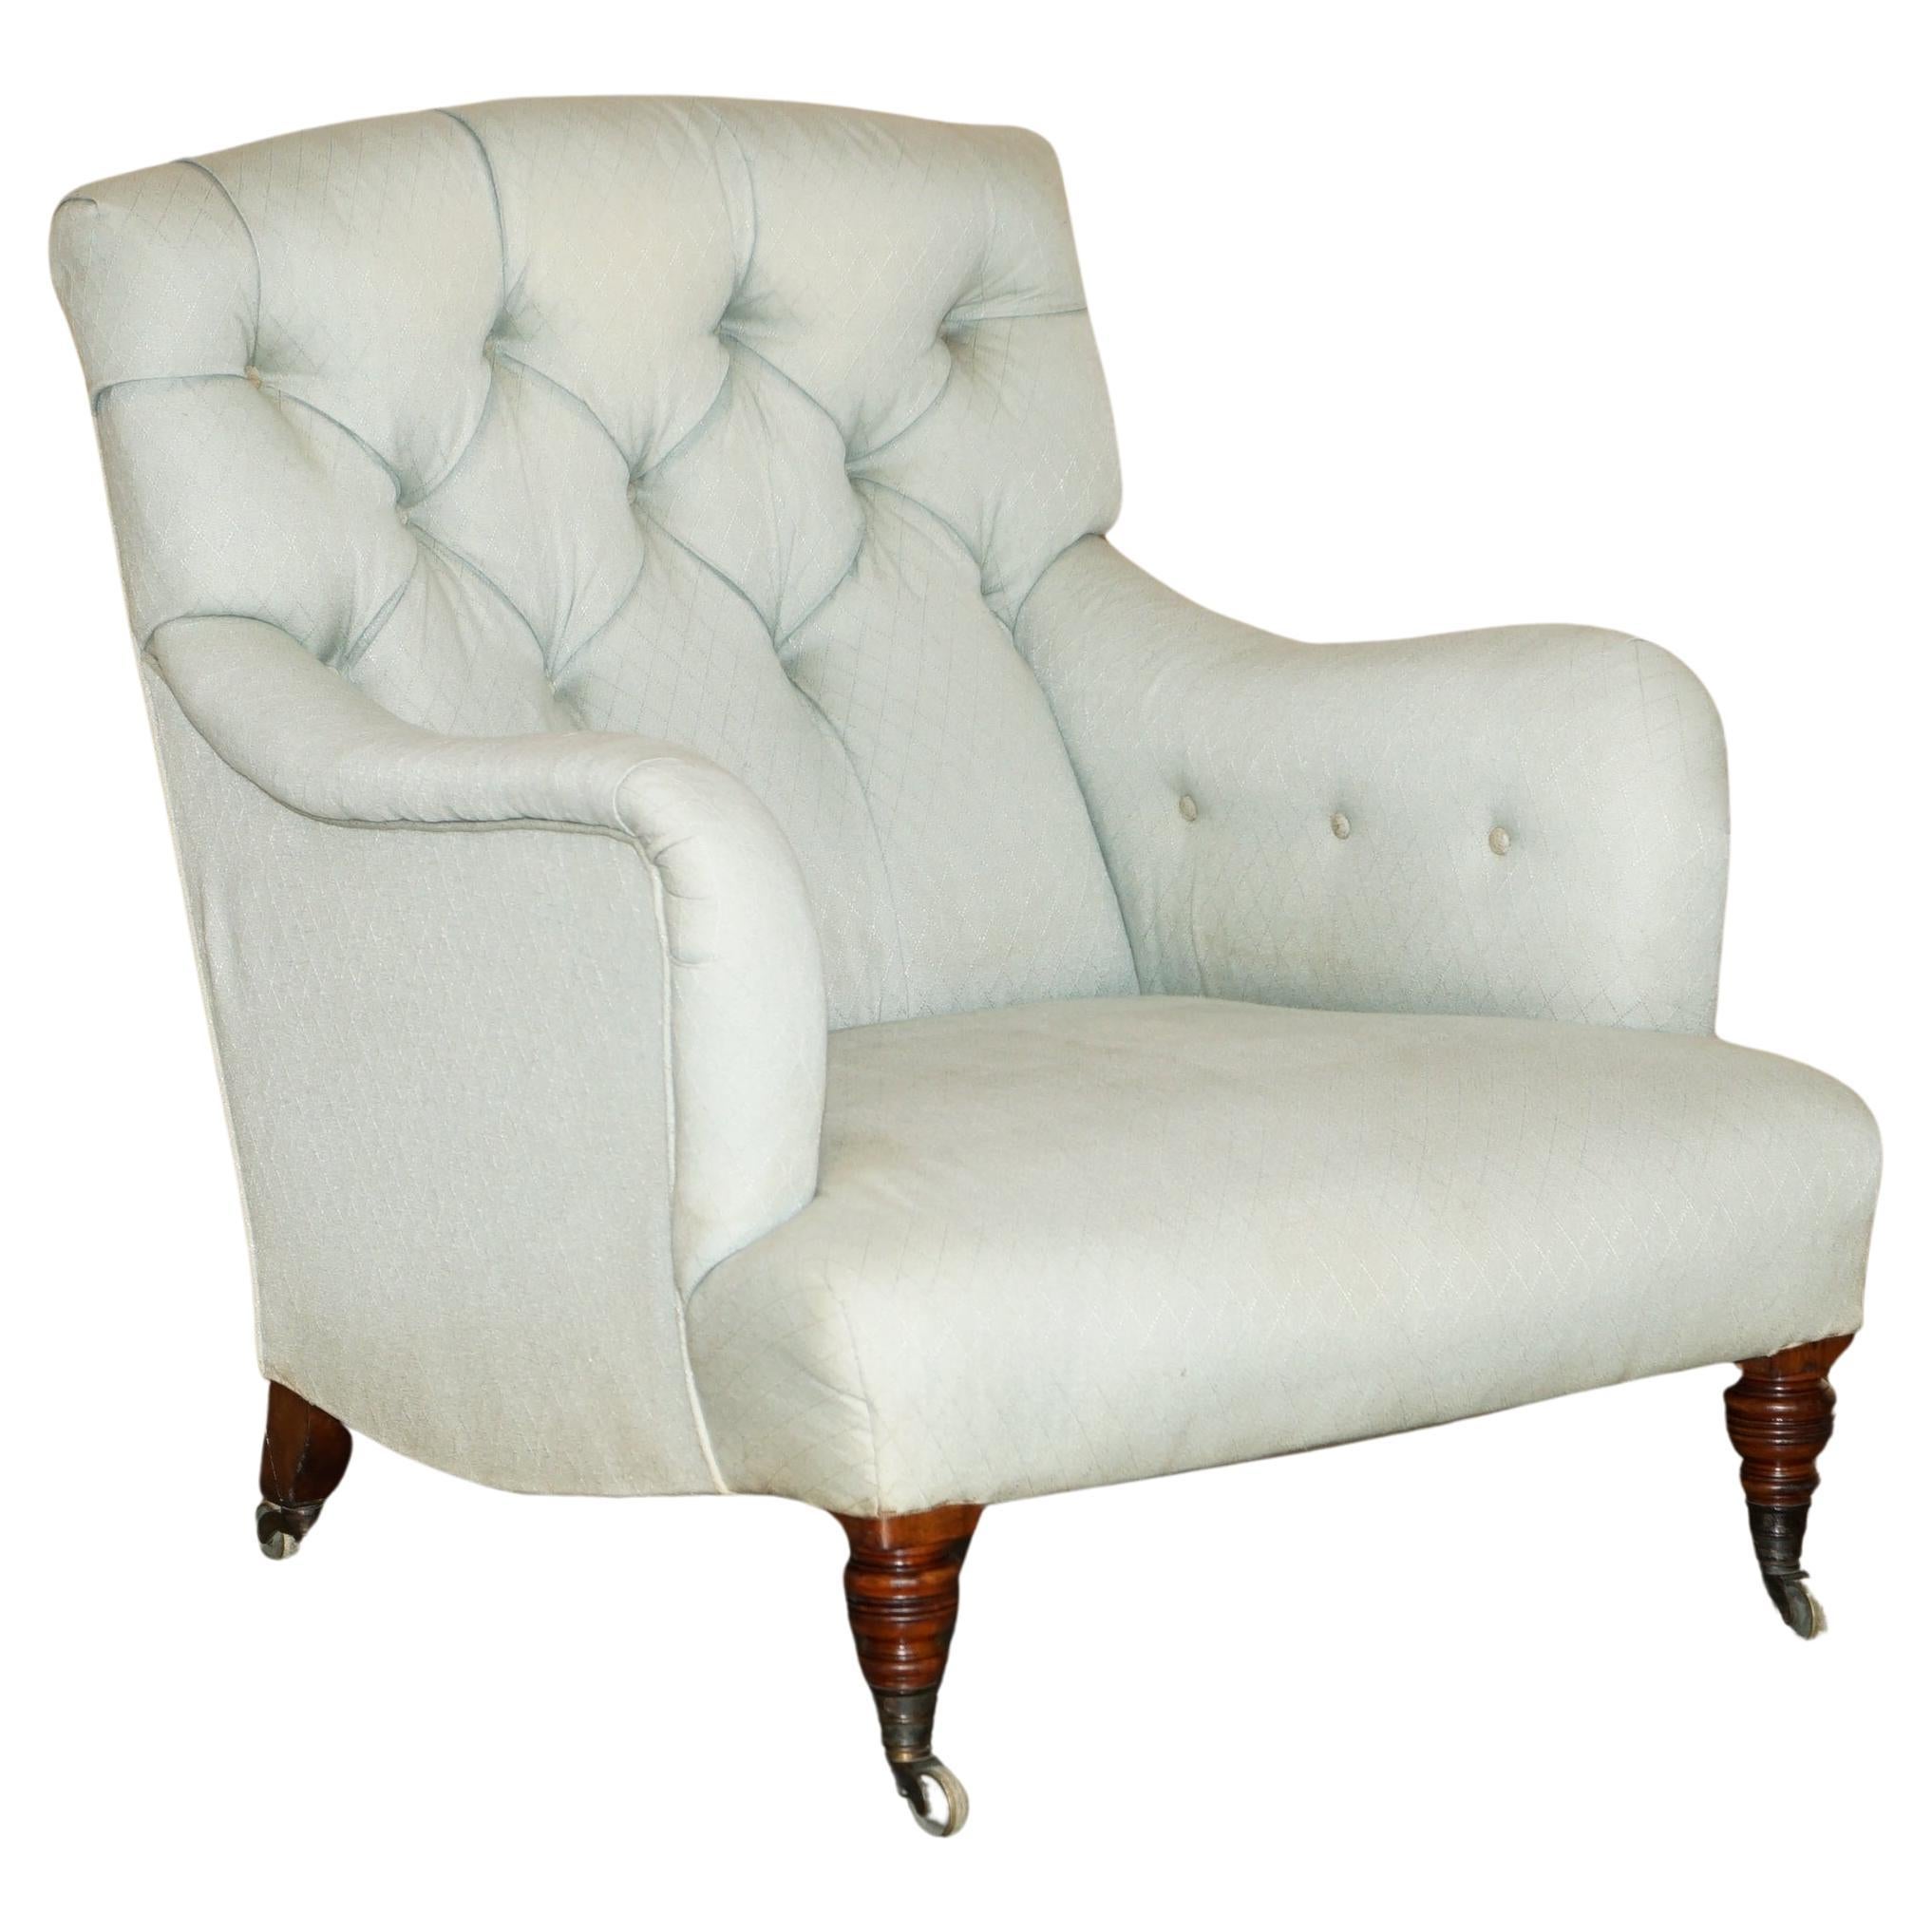 Royal House Antiques

Royal House Antiques is delighted to offer for sale this super rare, totally original, Howard & Son's Berners street fully stamped Bridgewater model armchair with the super rare, English Country House period upholstery 

Please